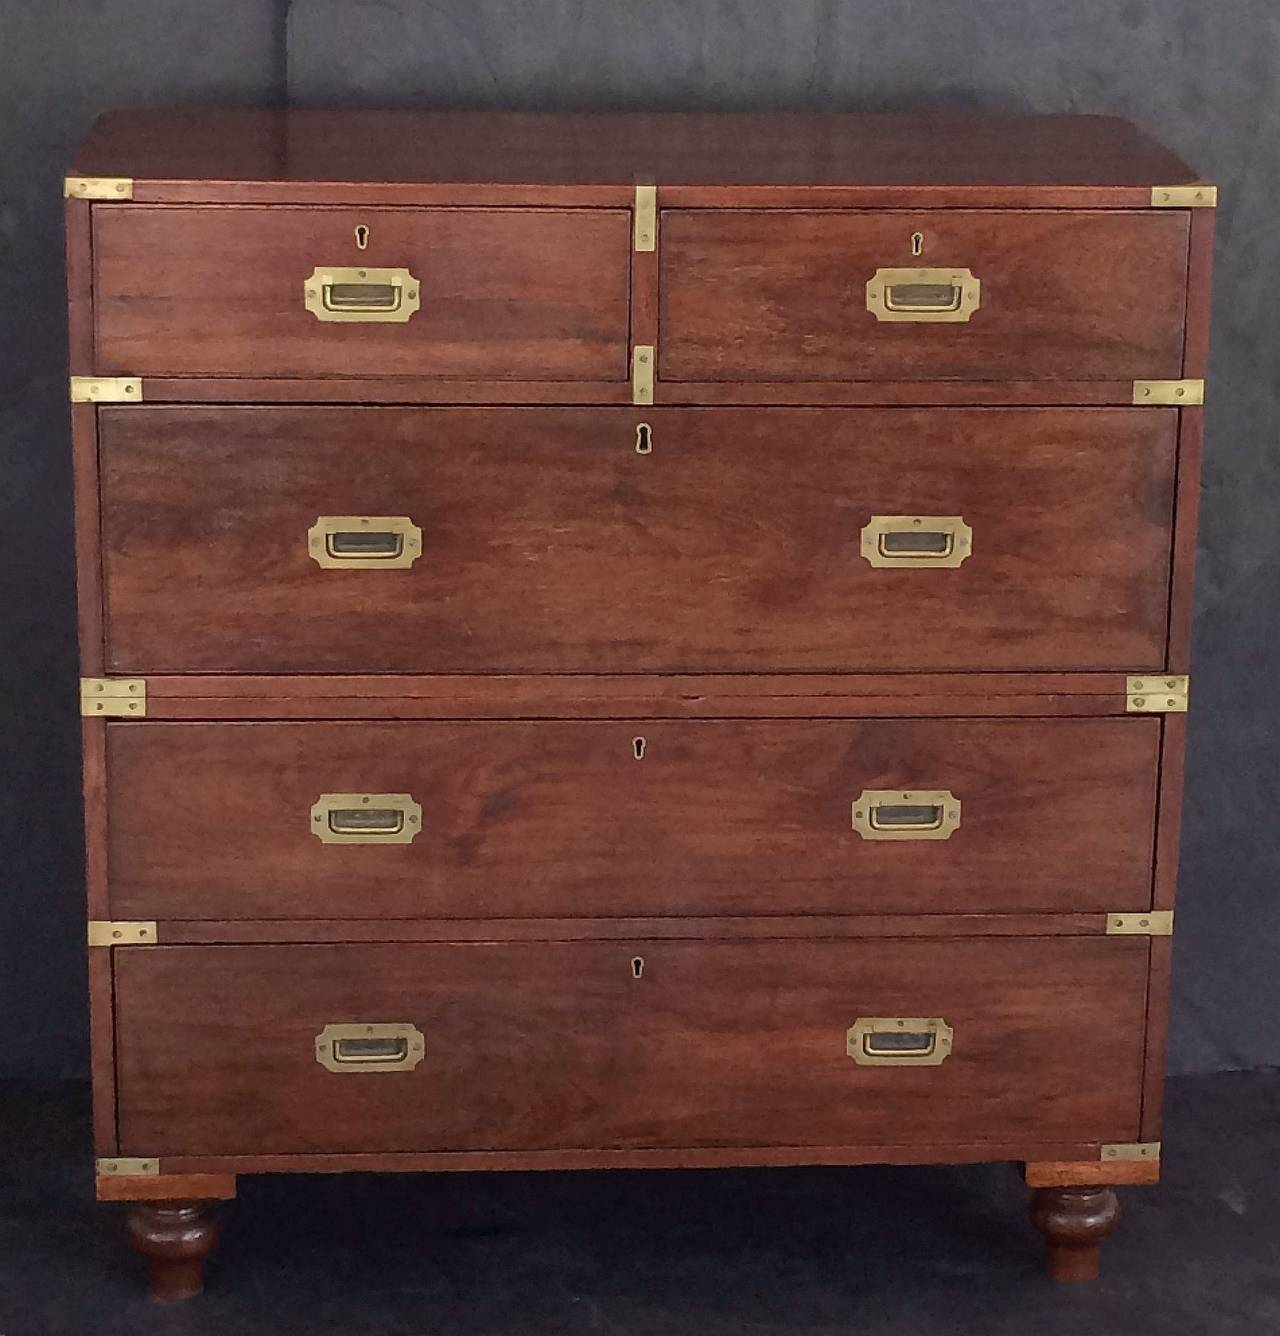 An English military officer’s Campaign ware chest, featuring a dark teakwood exterior, showing two short drawers over three long drawers. The brass-bound chest, in two parts, accented with recessed brass hardware, resting on shaped feet.

This